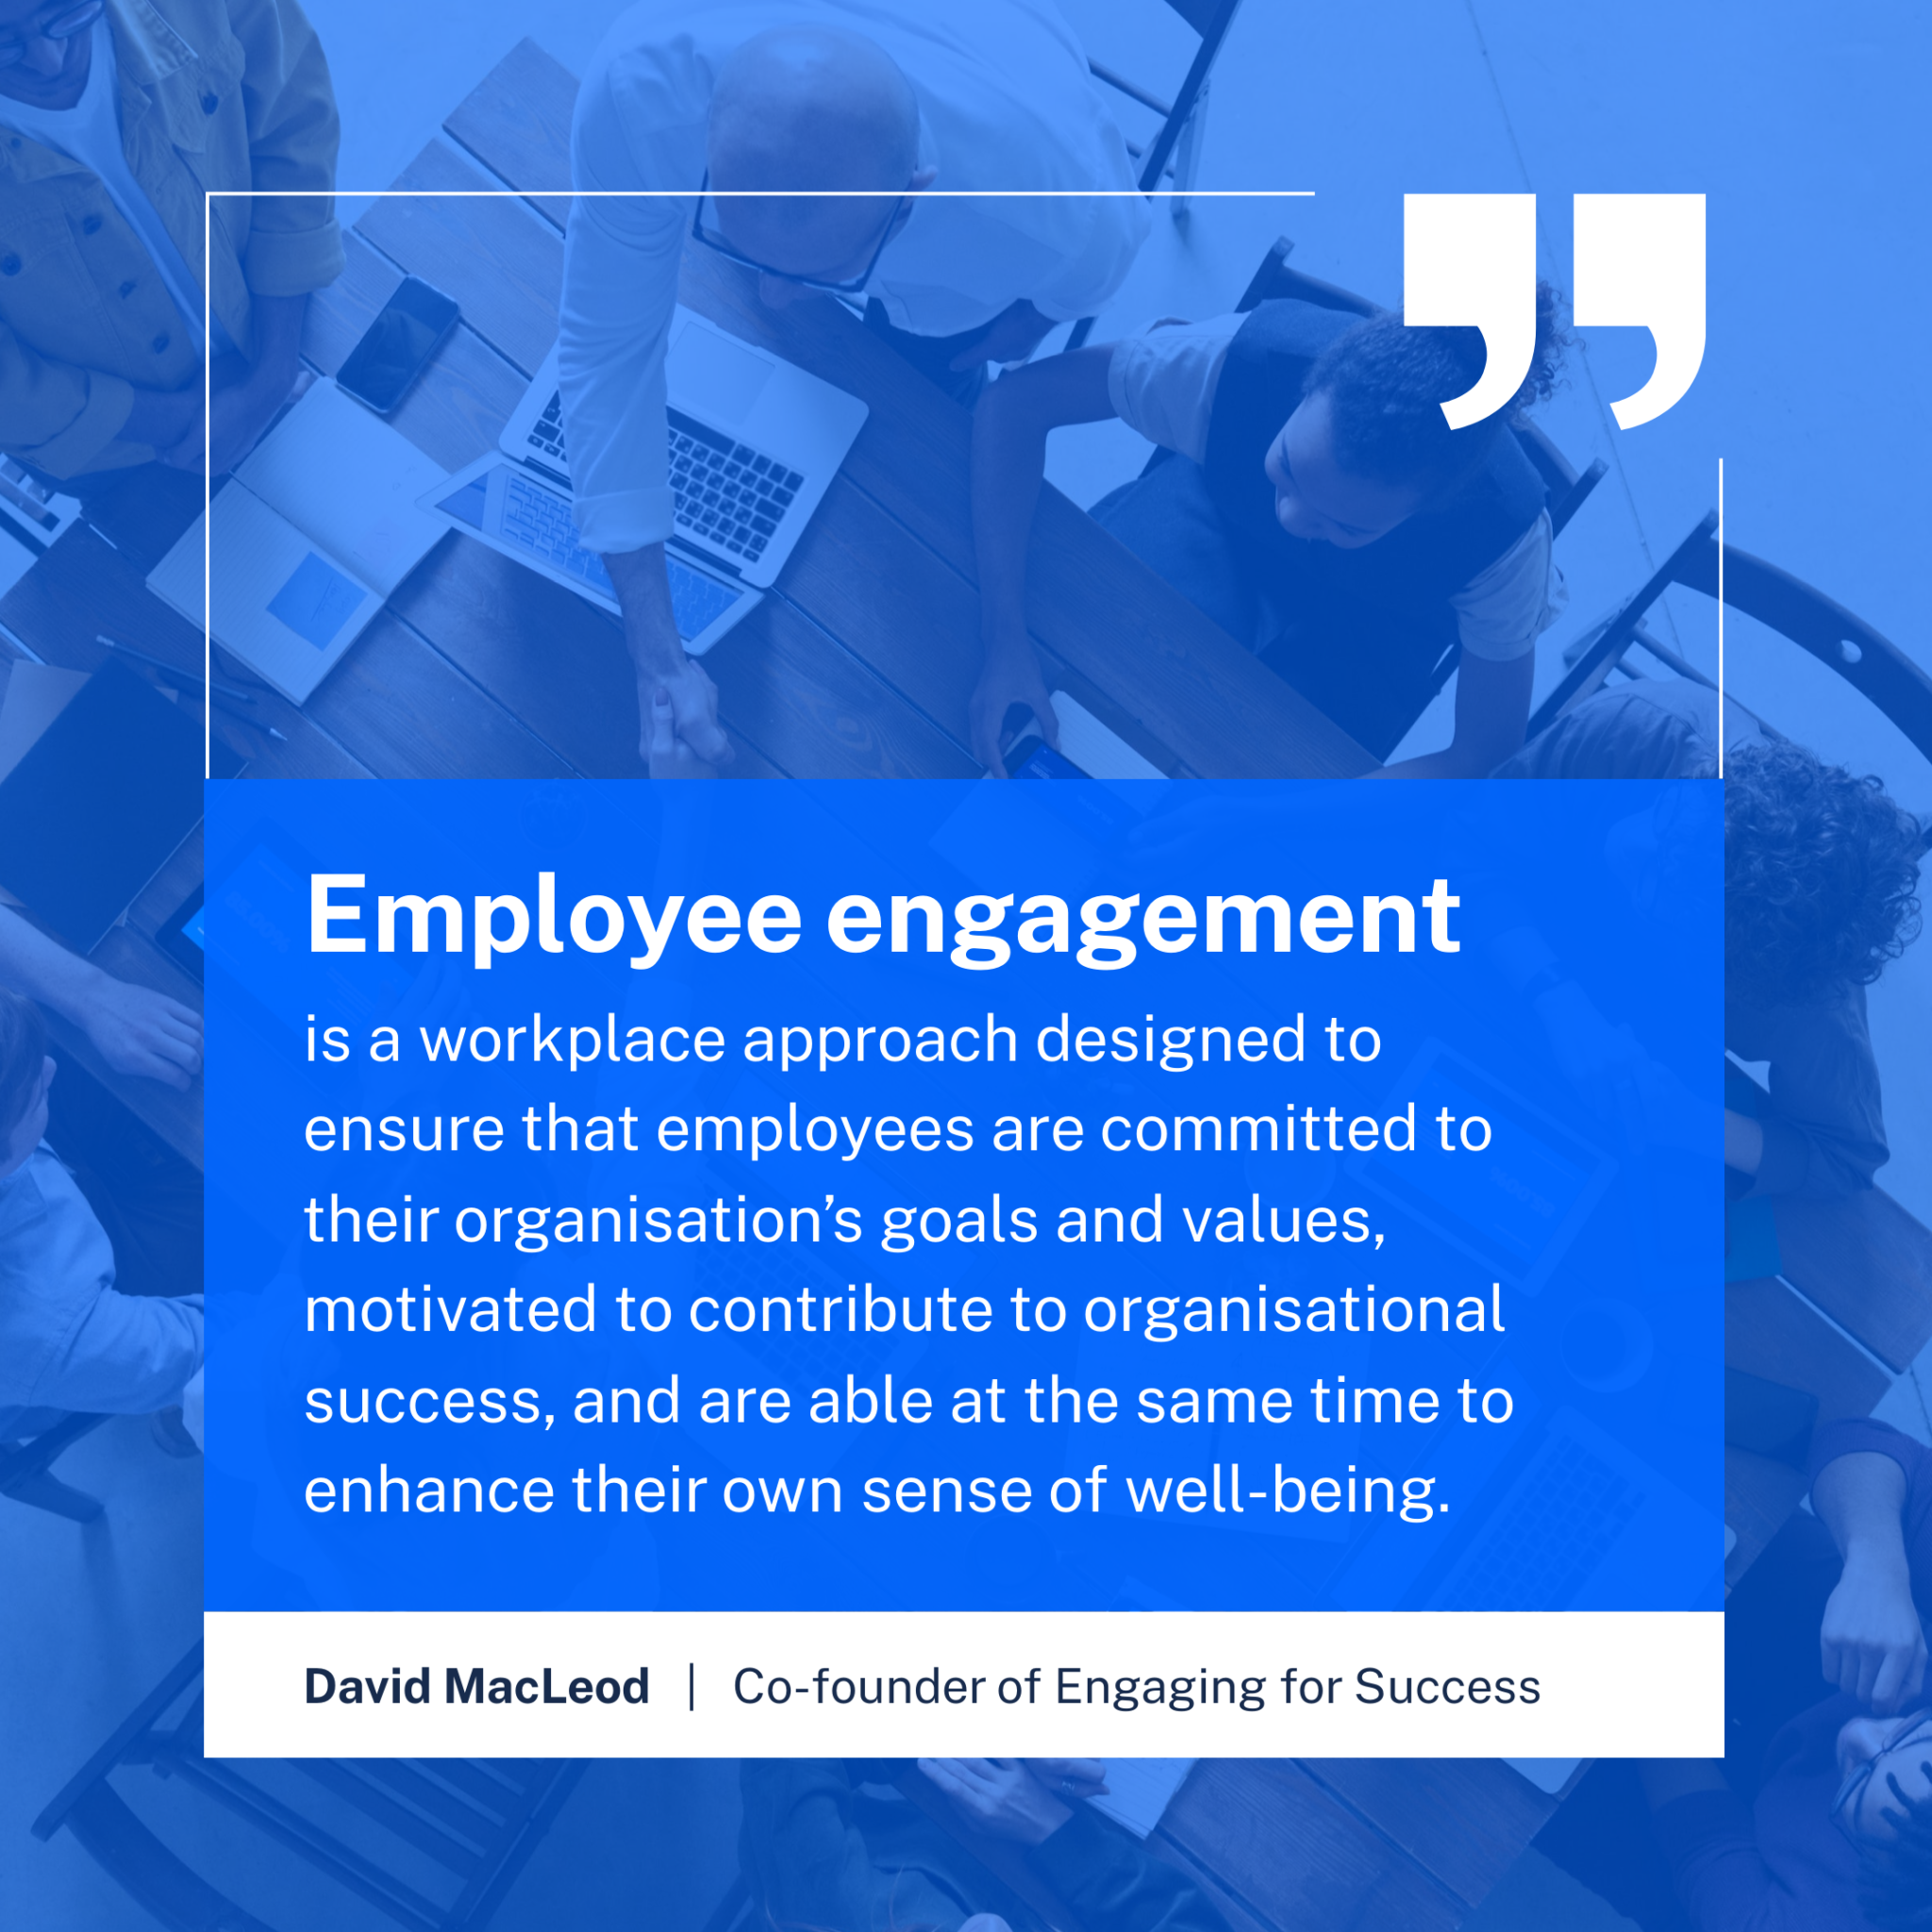 quote by david macleod
eod about employee engagement